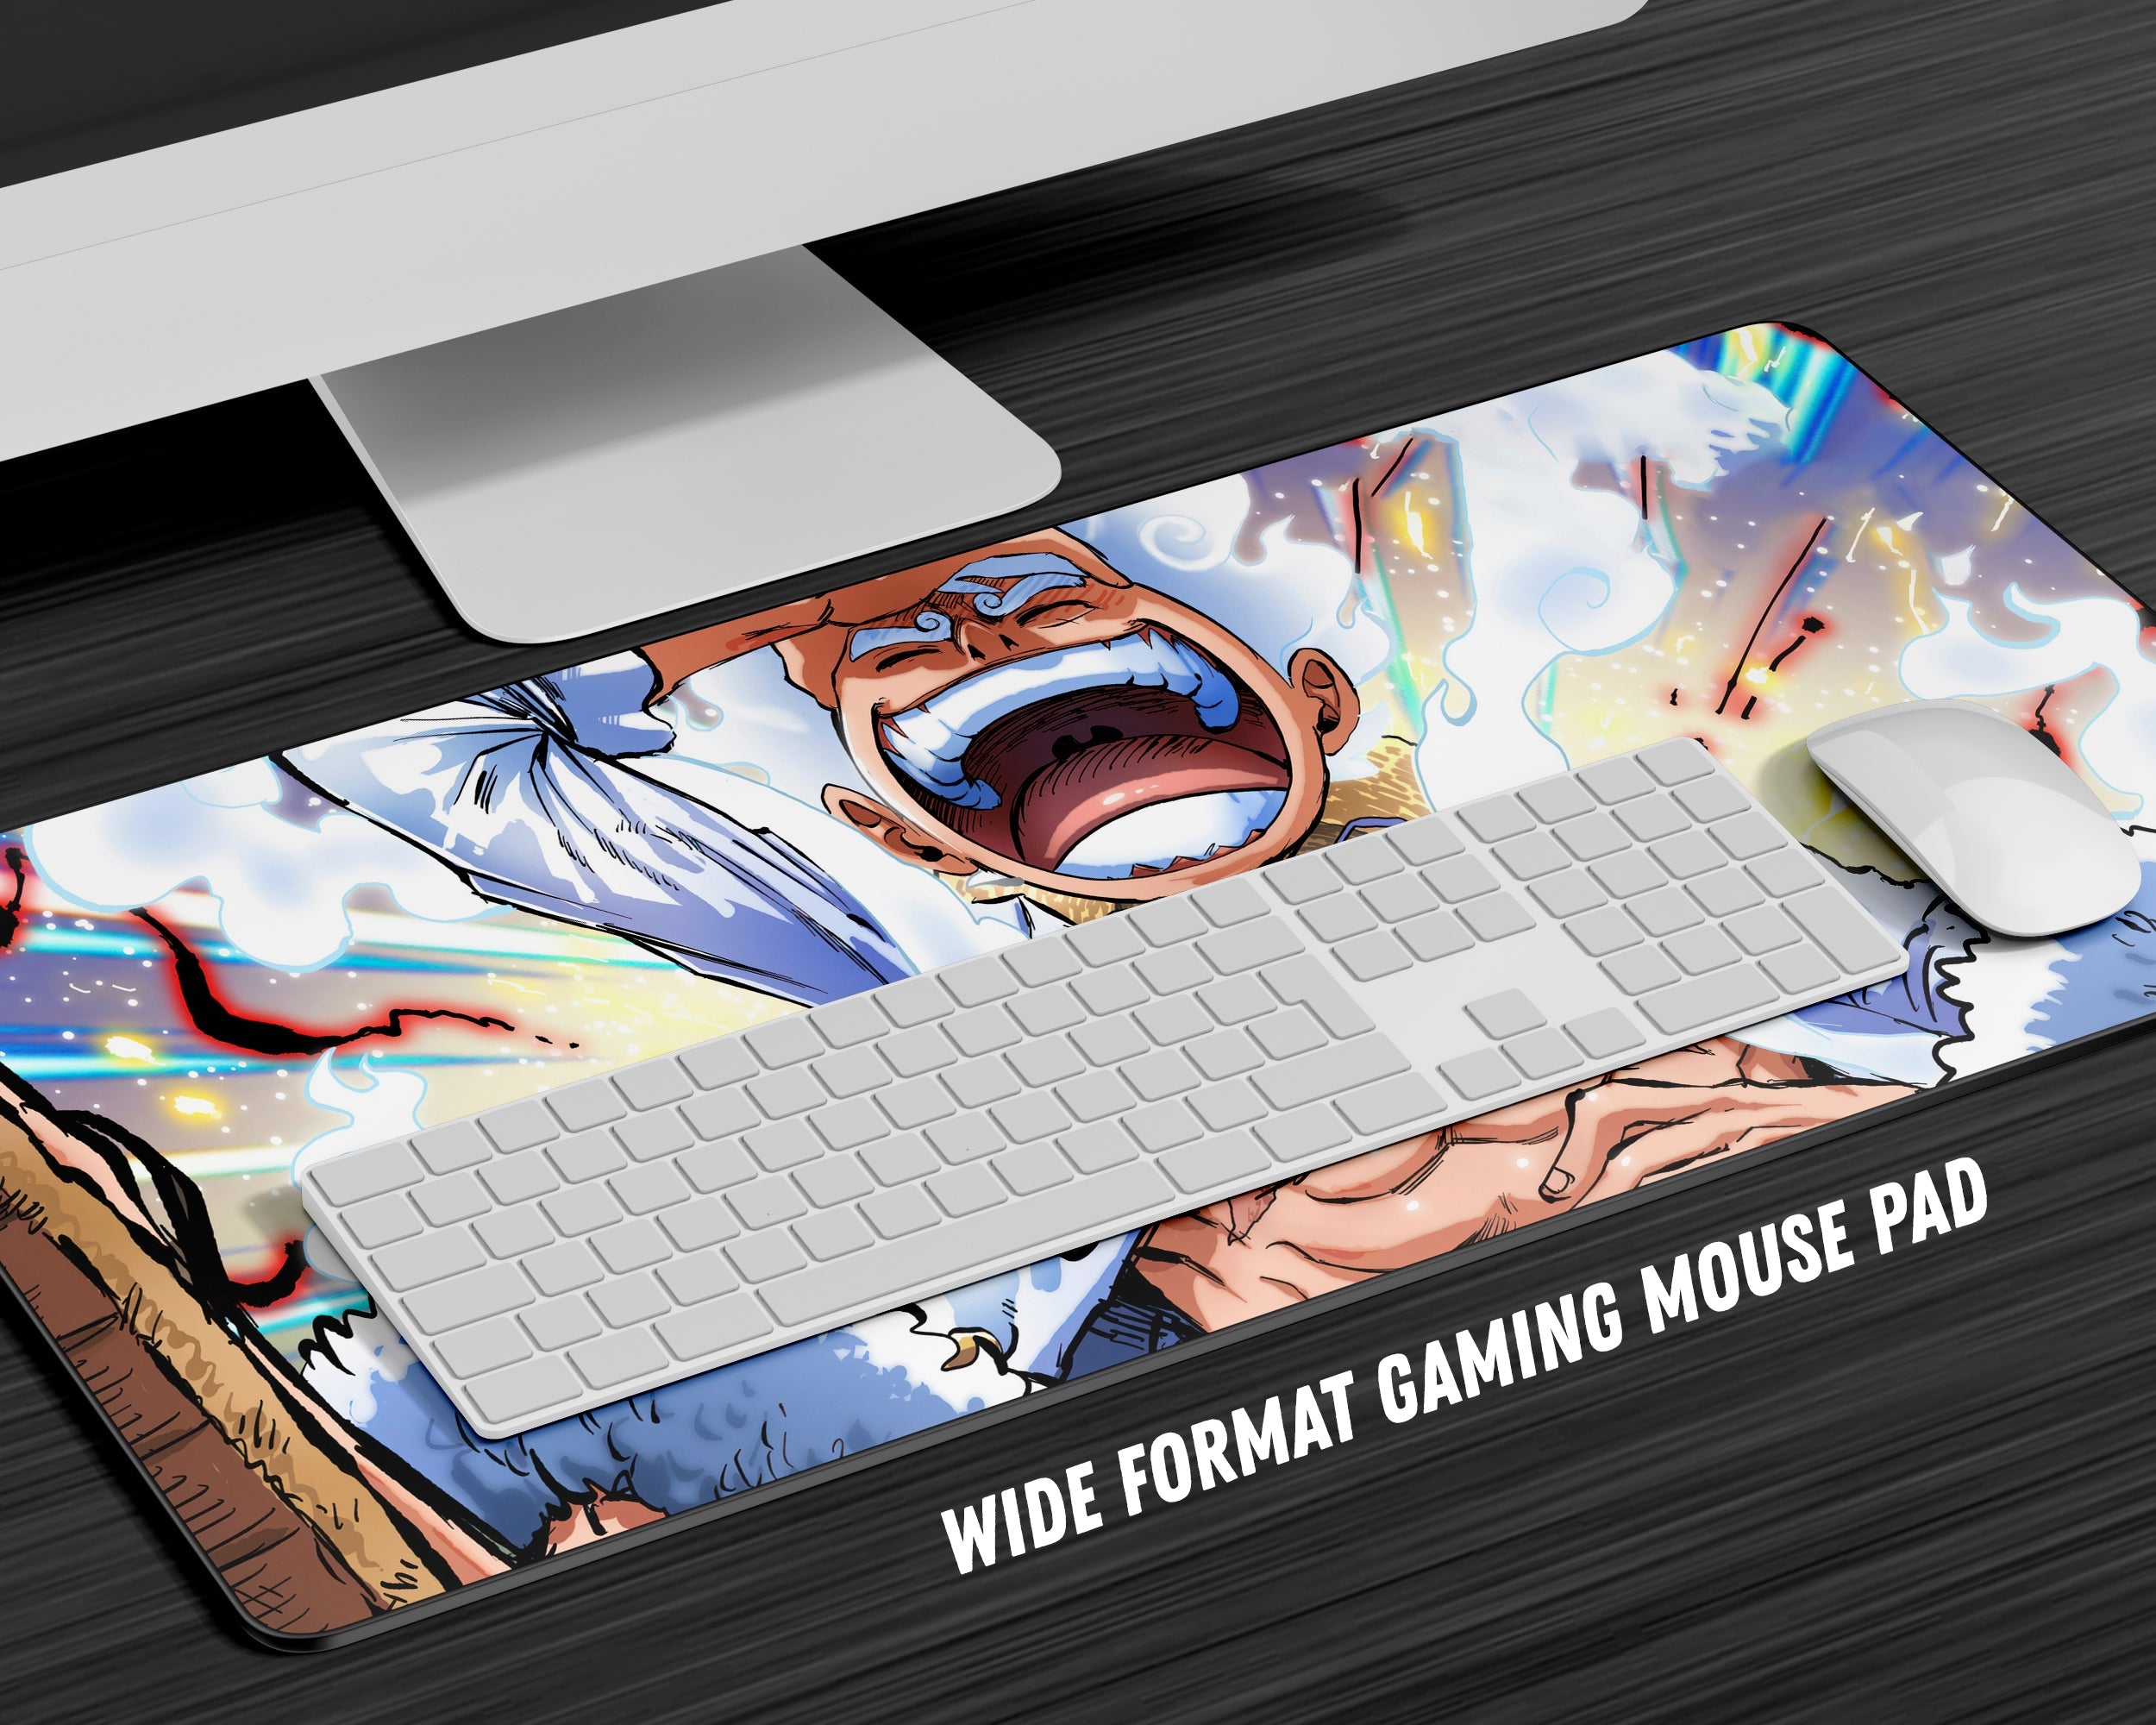 Ergonomic Mouse Pad with Gel Wrist Support 3D Funny Butt Anime Wrist Rest -  3360 | eBay